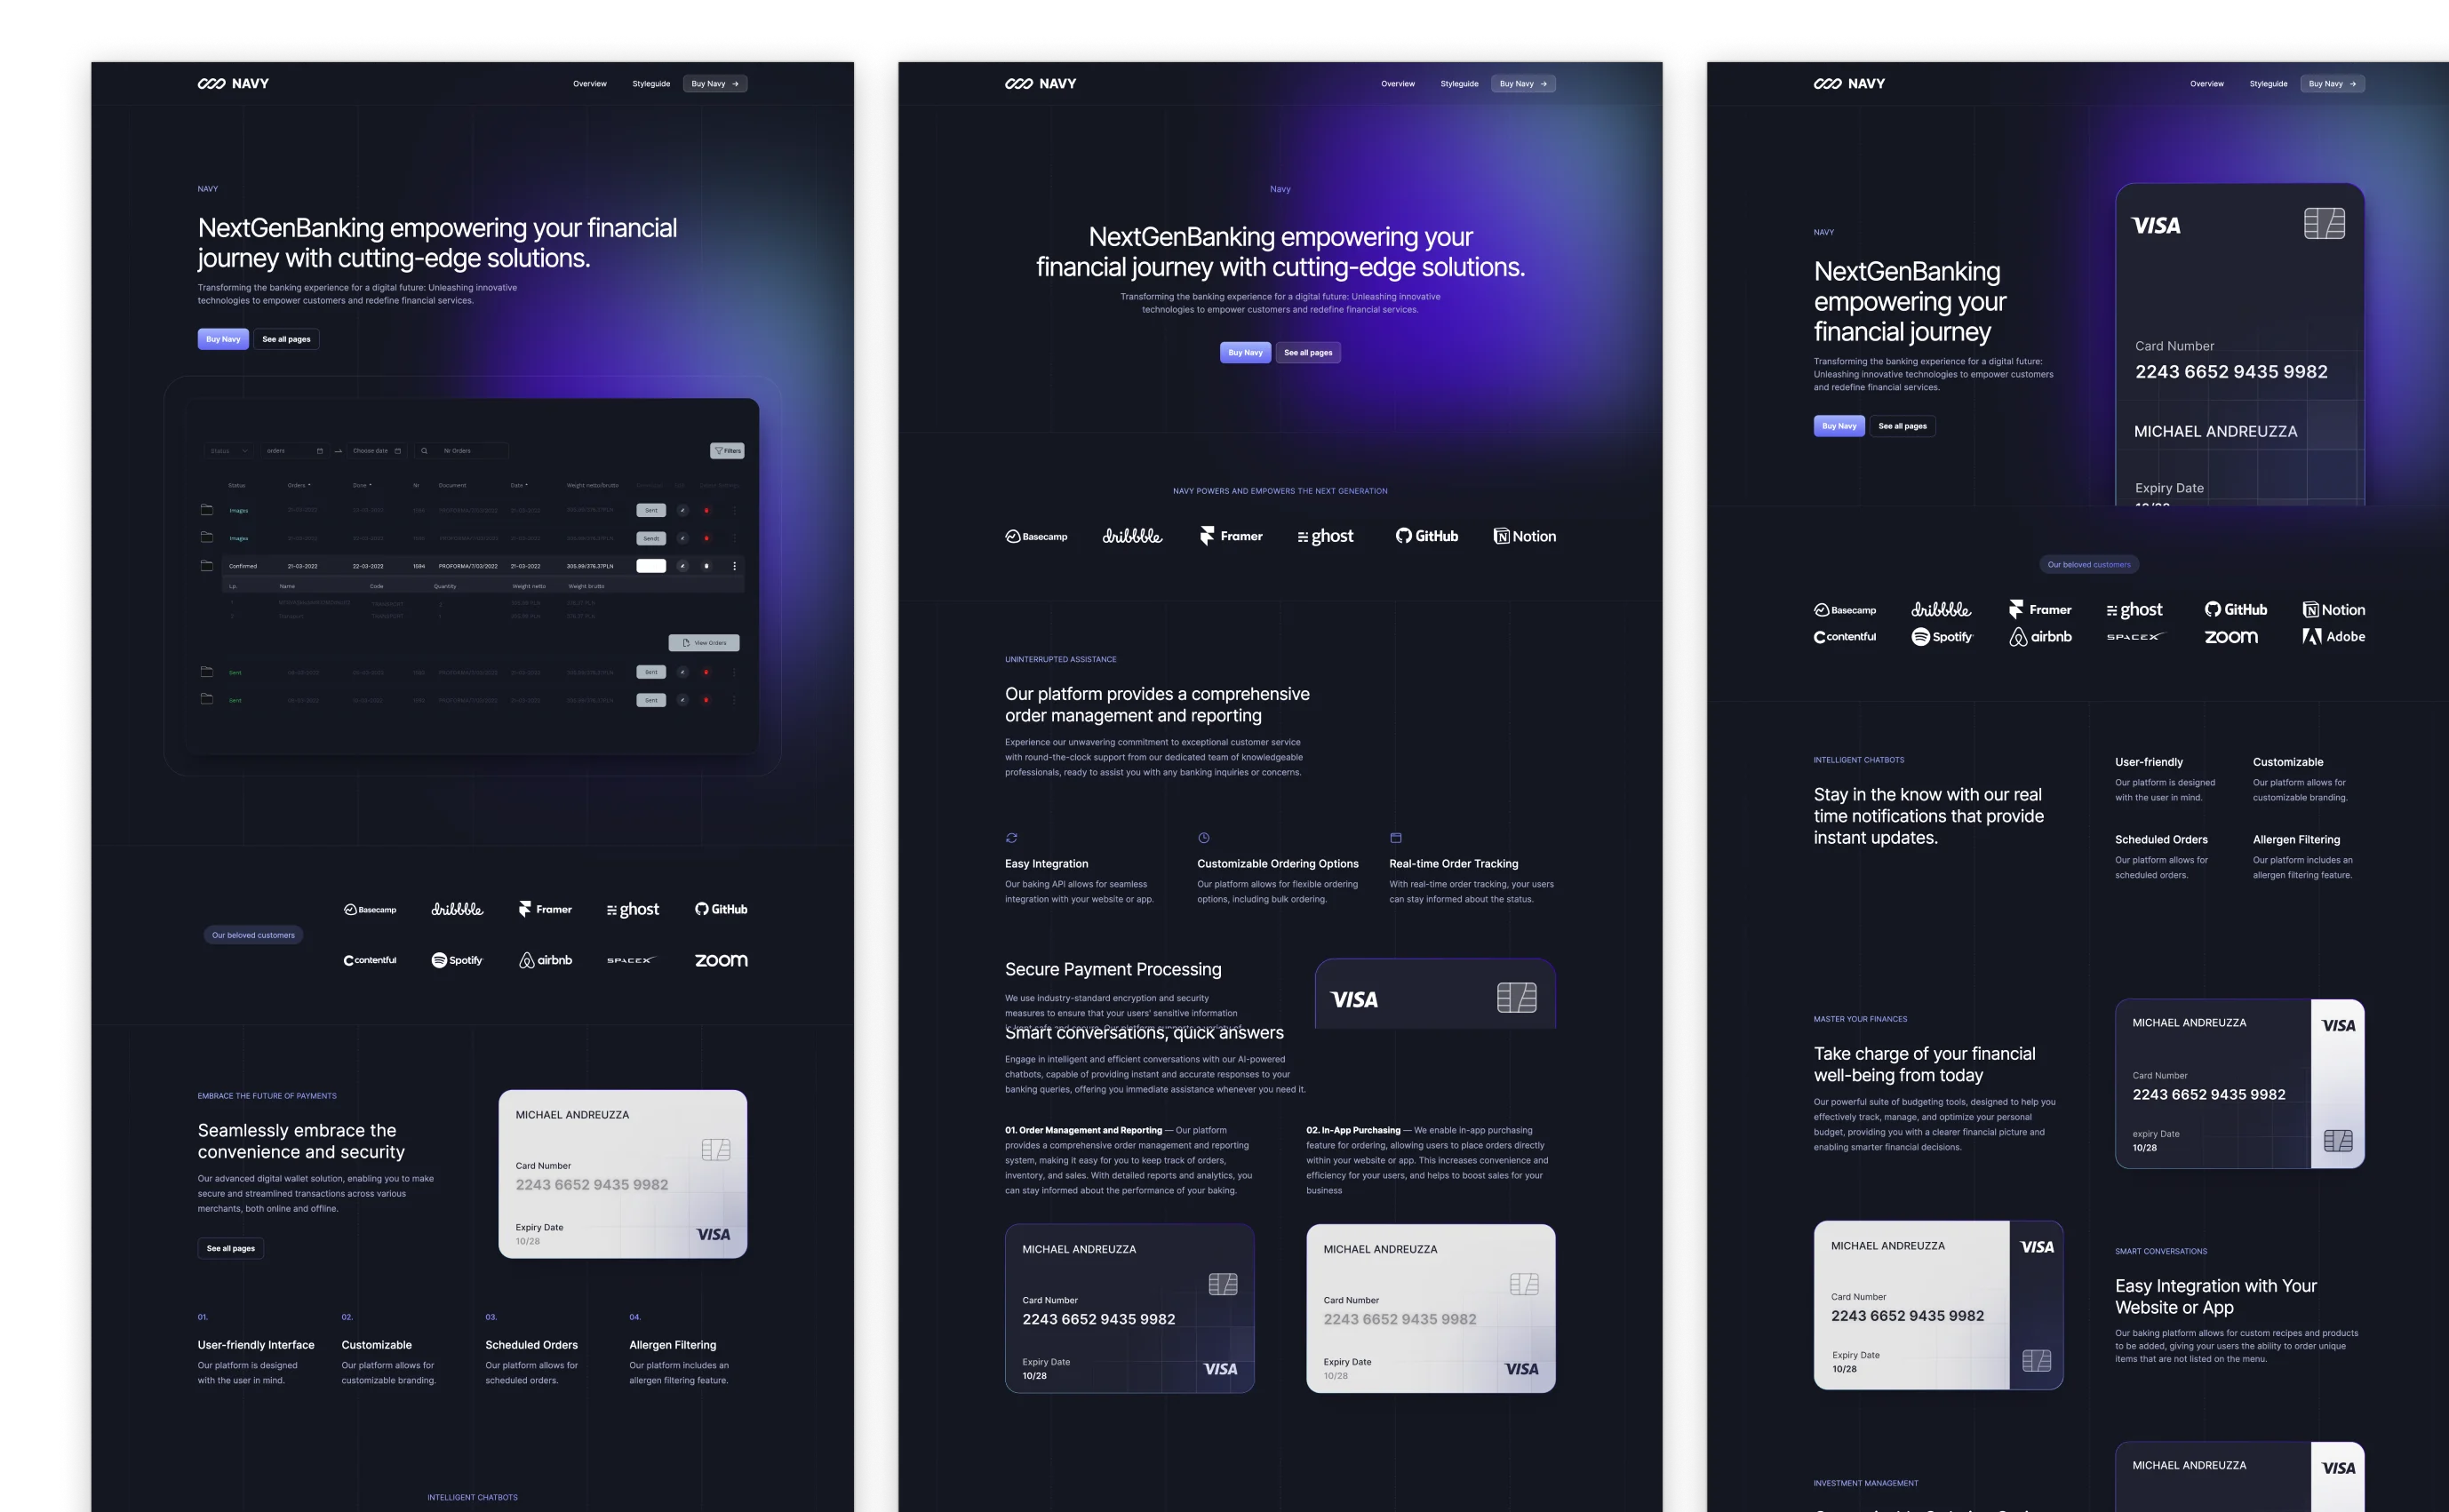 Navy theme interface displaying a dark mode financial dashboard with vibrant purple accents. Features include secure payment processing, user-friendly interface, and easy navigation. Client logos like Dropbox and GitHub are shown for trust endorsement.